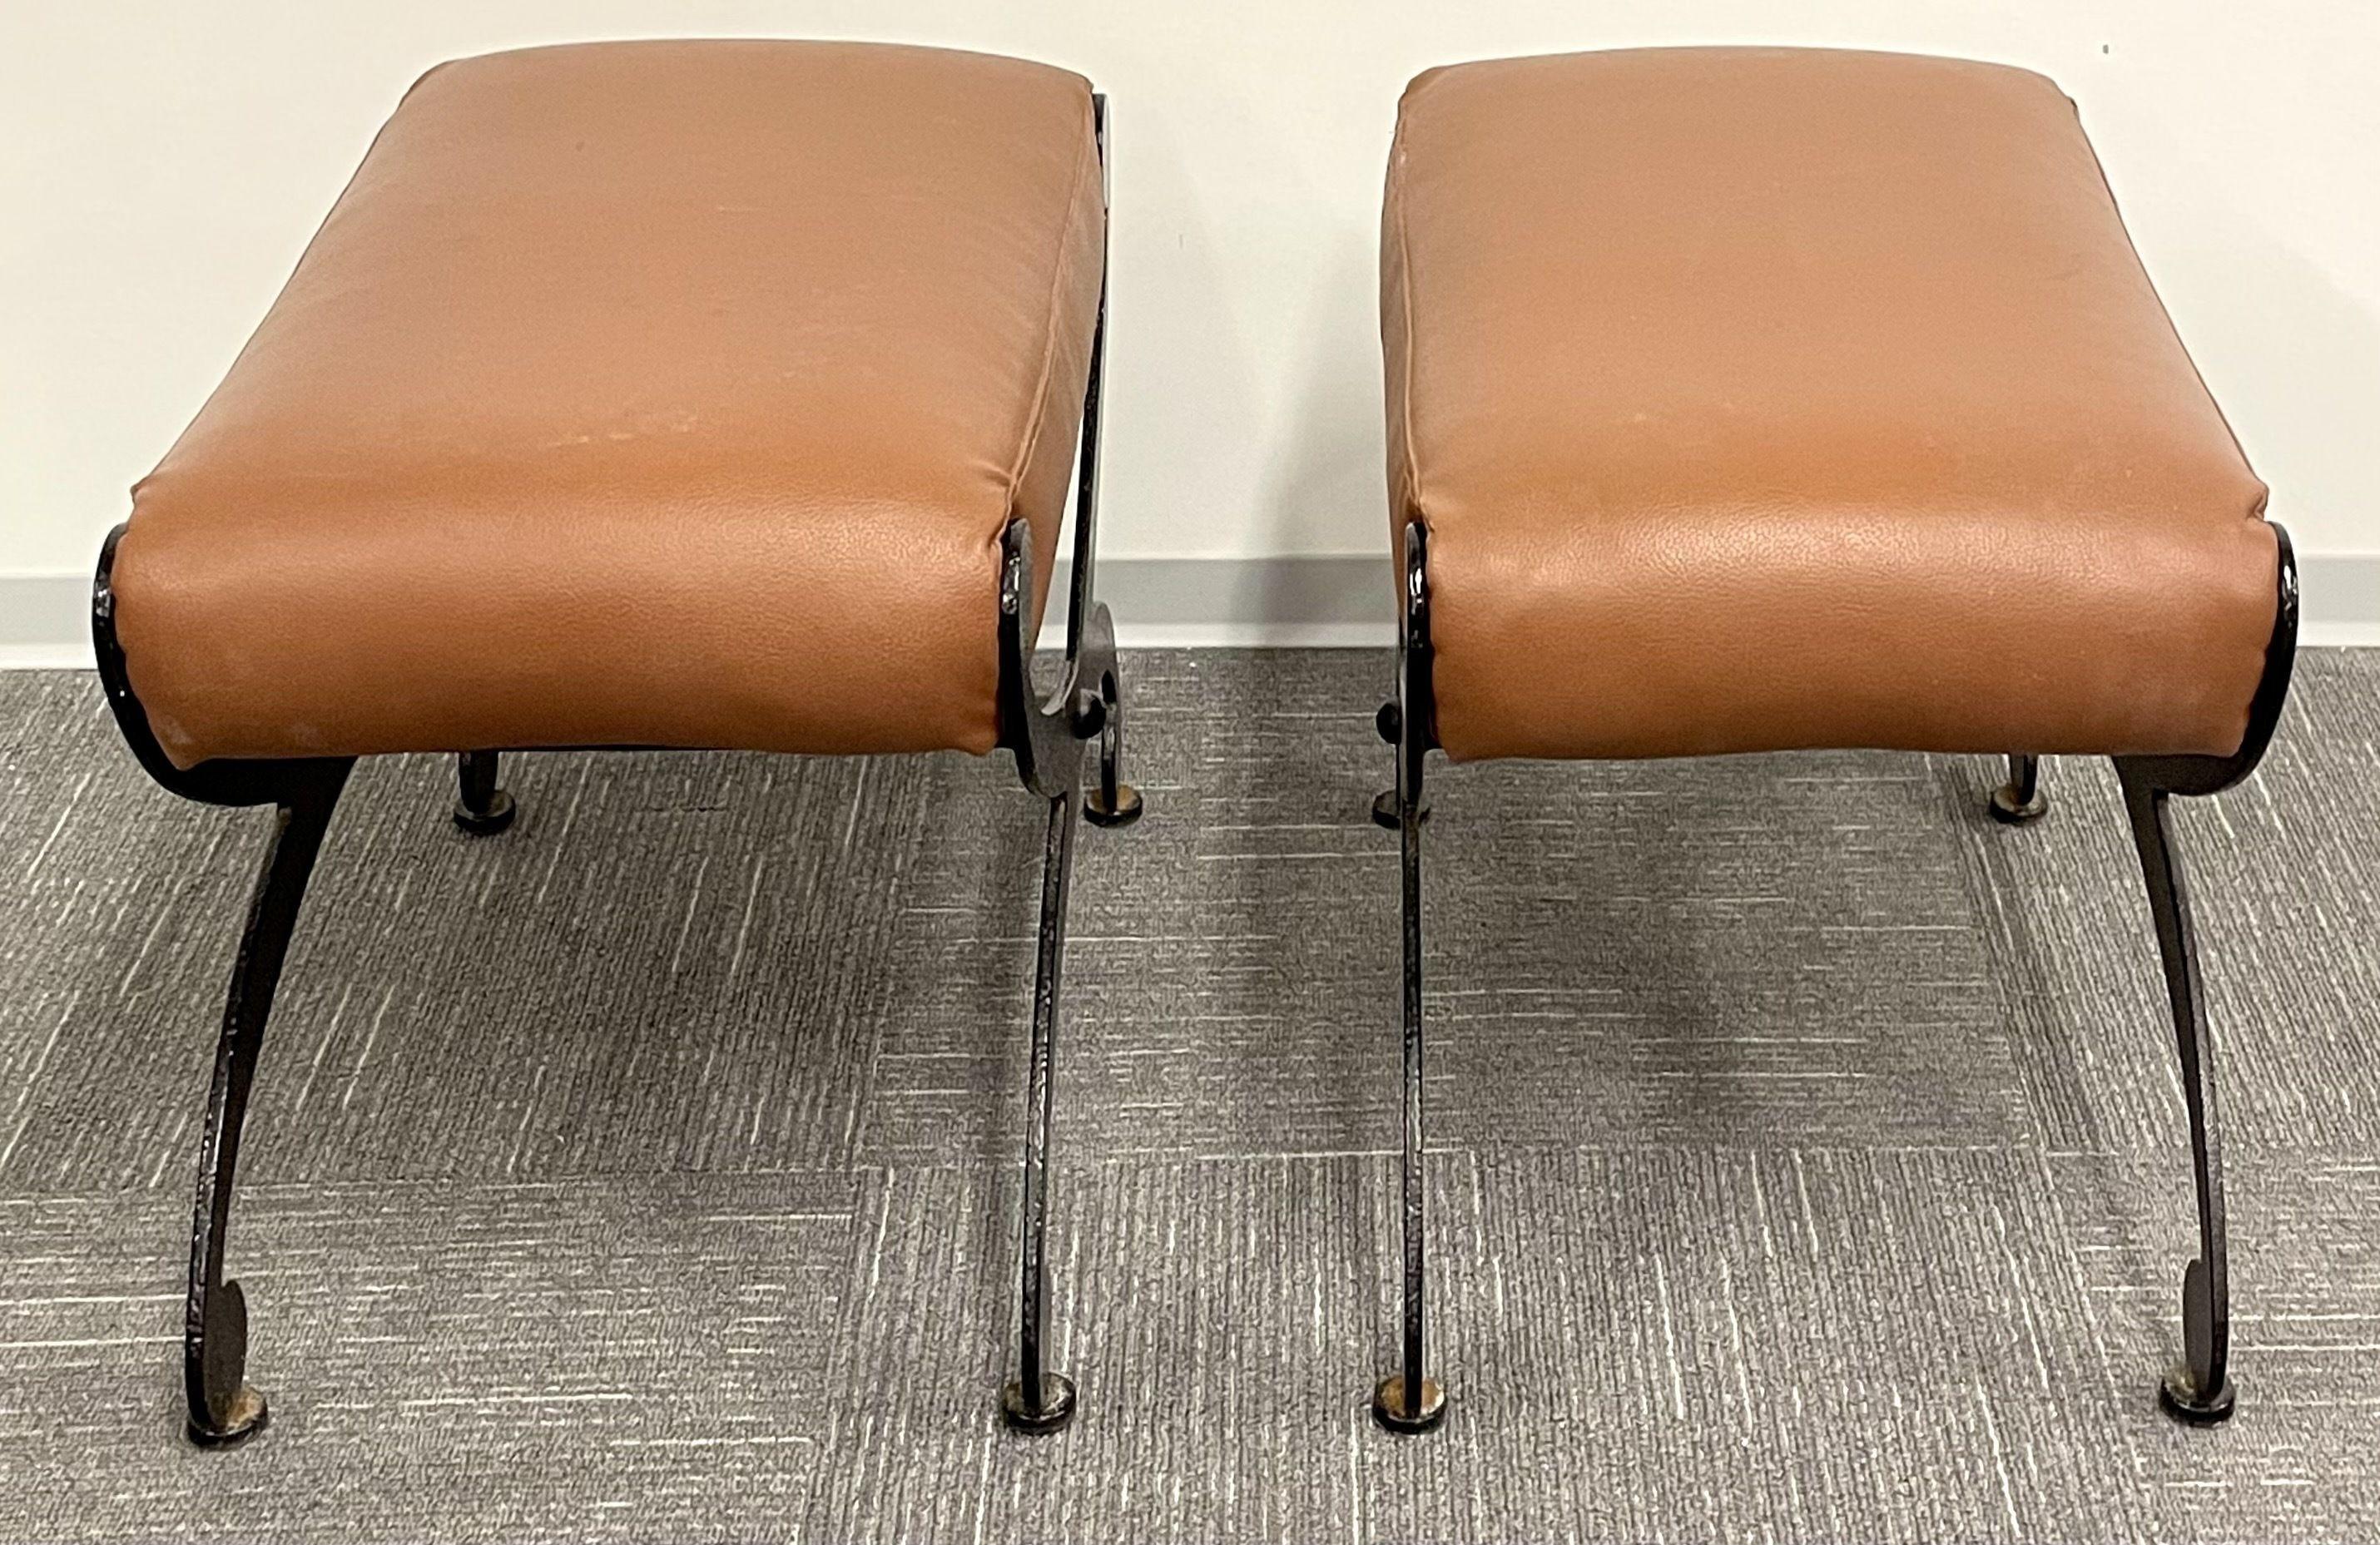 Pair of Metal x Form Benches, Footstools, Ottomans, Leather Seats, Rustic In Good Condition For Sale In Stamford, CT